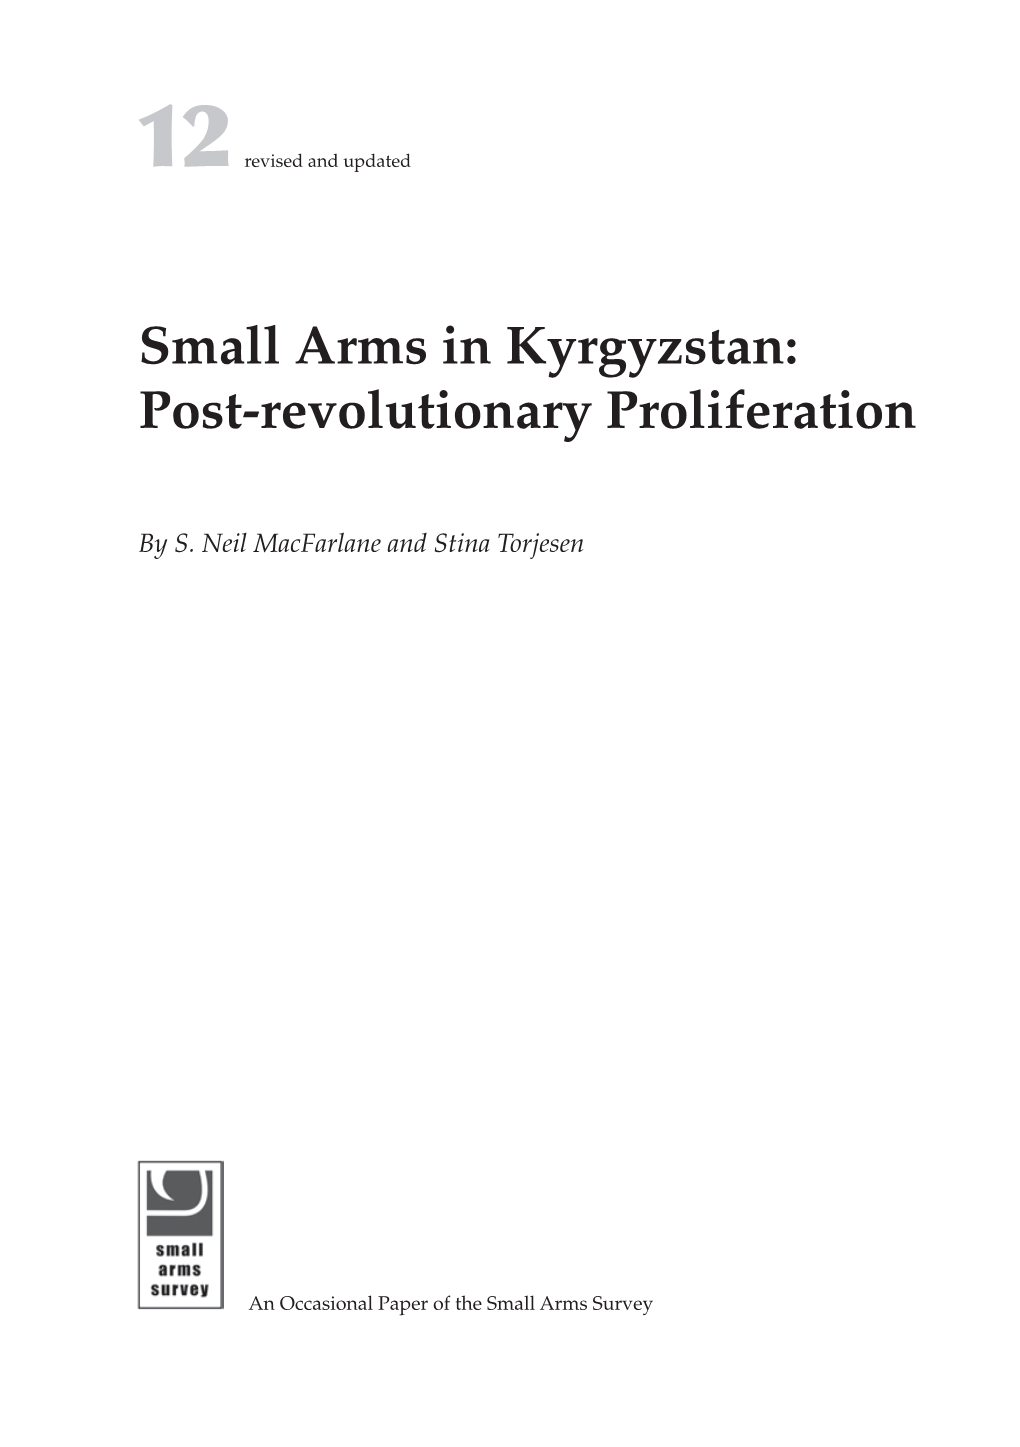 Small Arms in Kyrgyzstan: Post-Revolutionary Proliferation